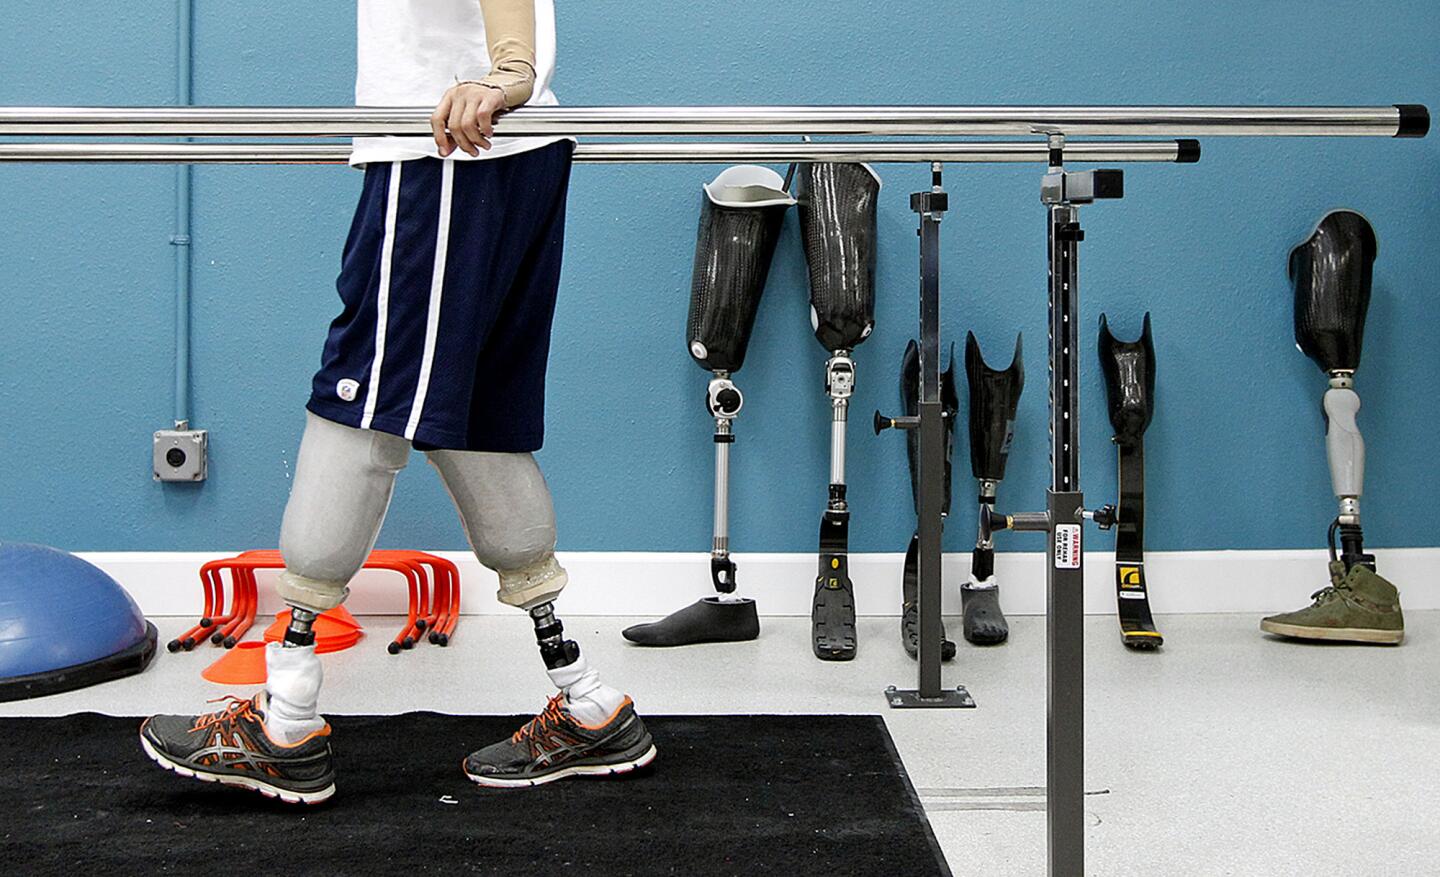 Aaron practices walking on prosthetic legs during a fitting at Peter Harsch Prosthetics in San Diego.